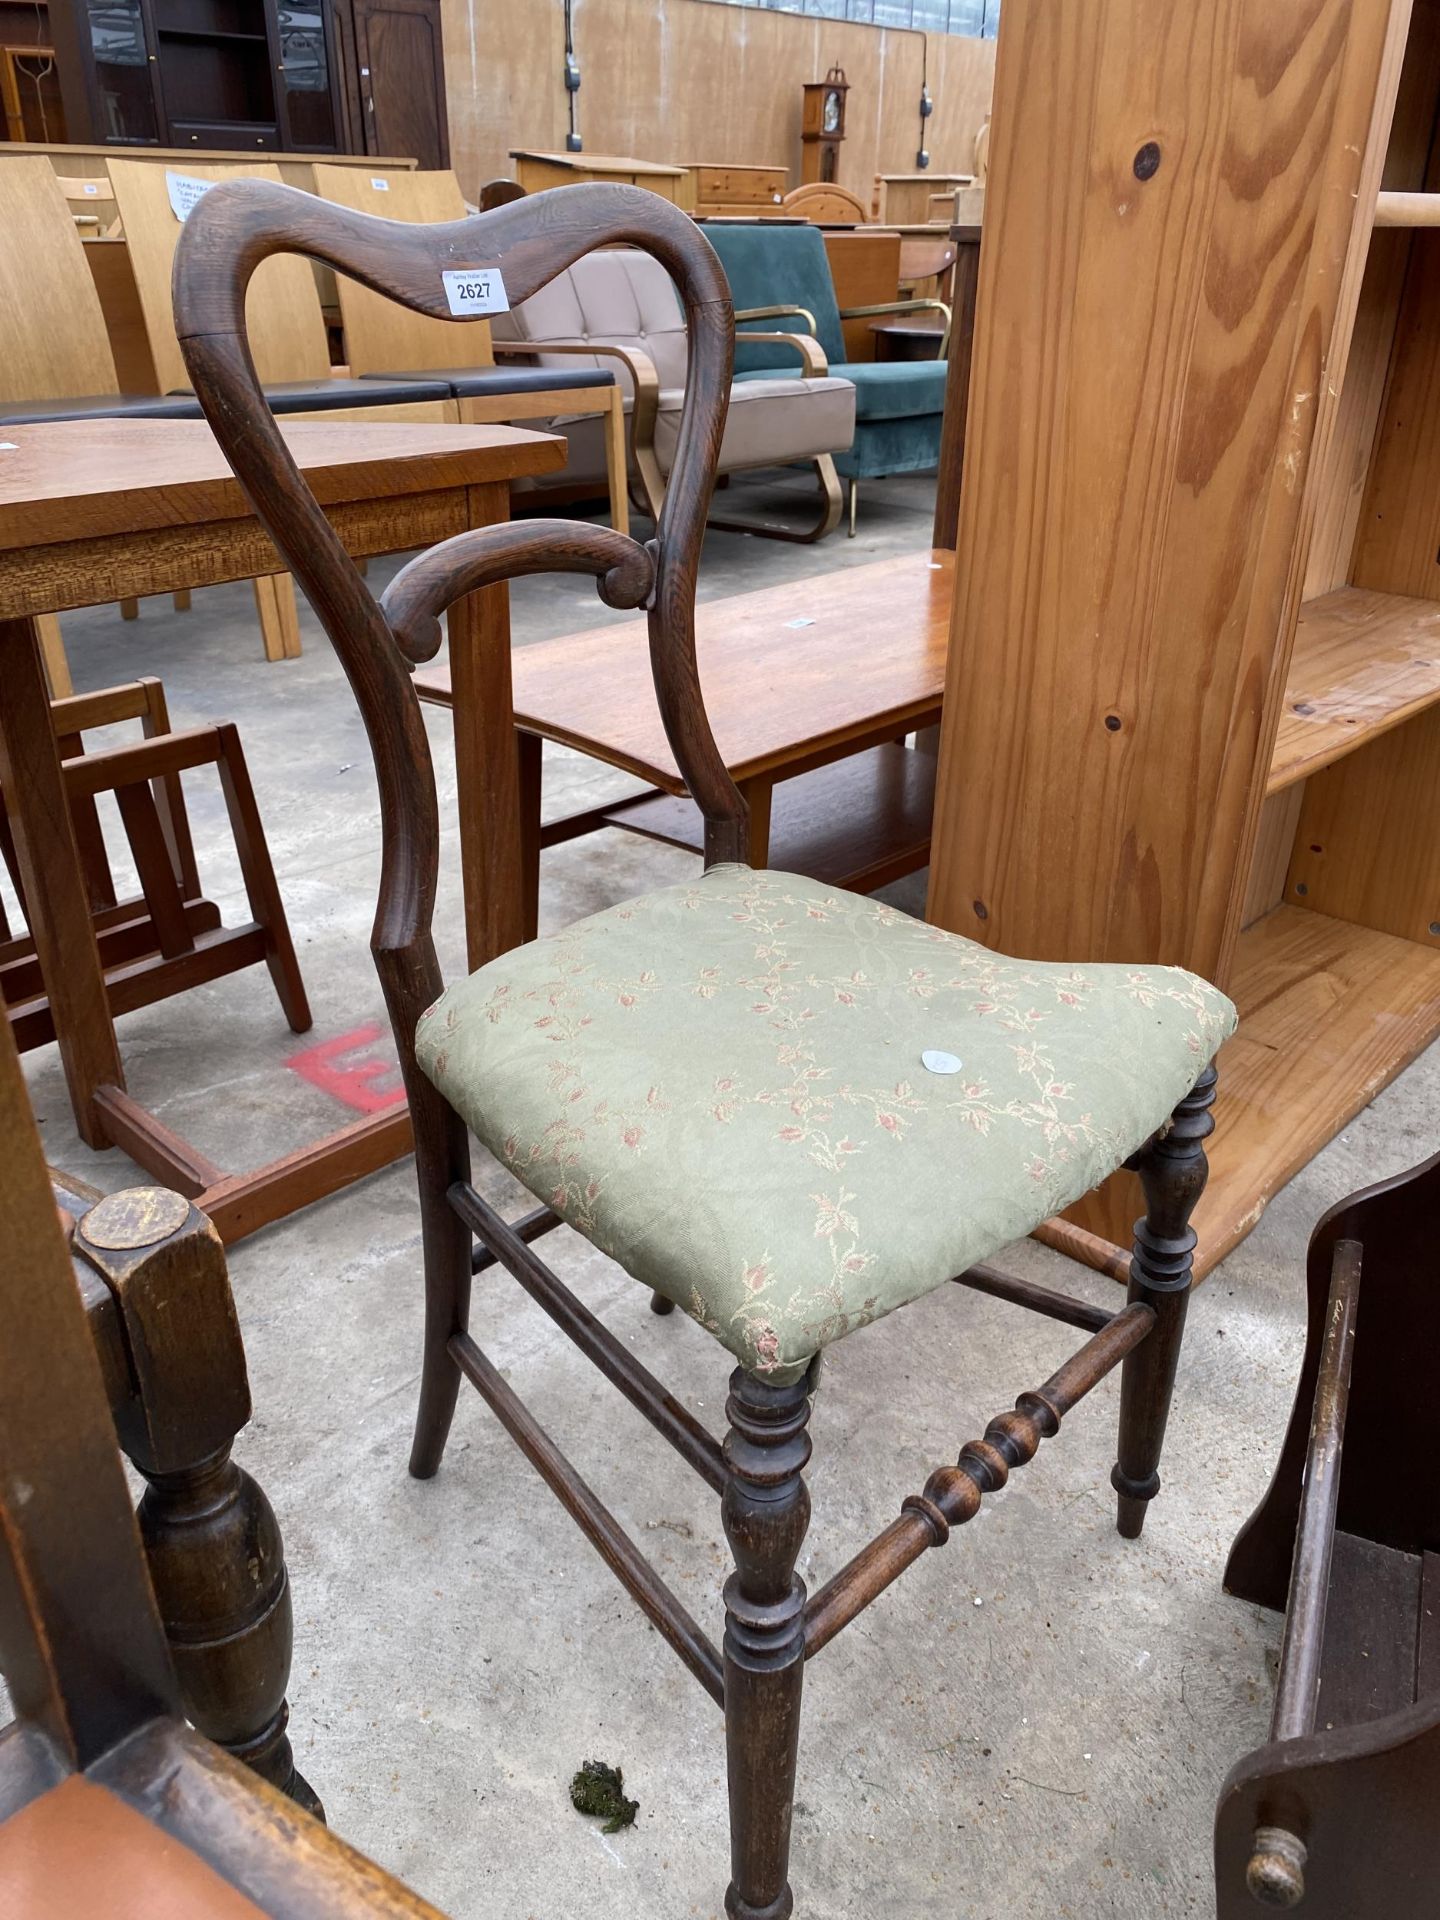 A VICTORIAN PARLOUR CHAIR AND MAGAZINE RACK - Image 3 of 3